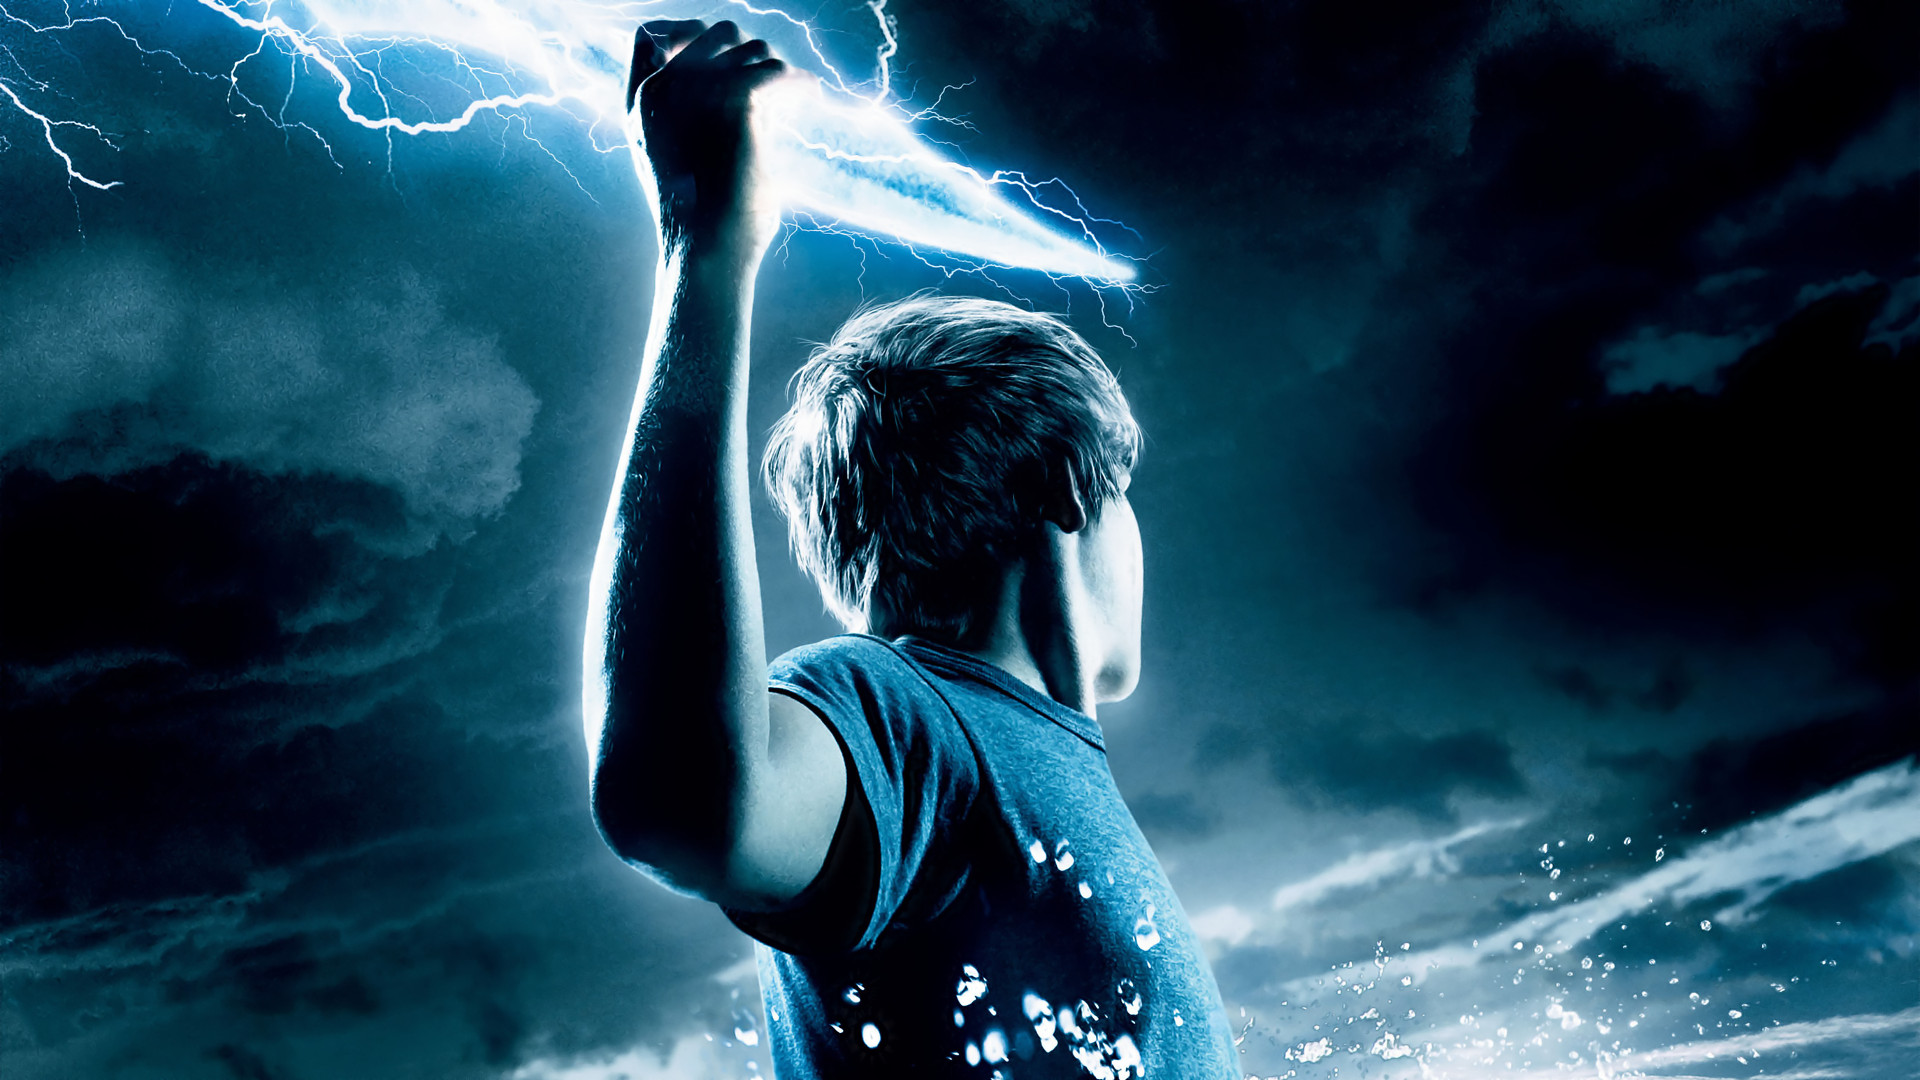 Movie Percy Jackson & the Olympians: The Lightning Thief HD Wallpaper | Background Image